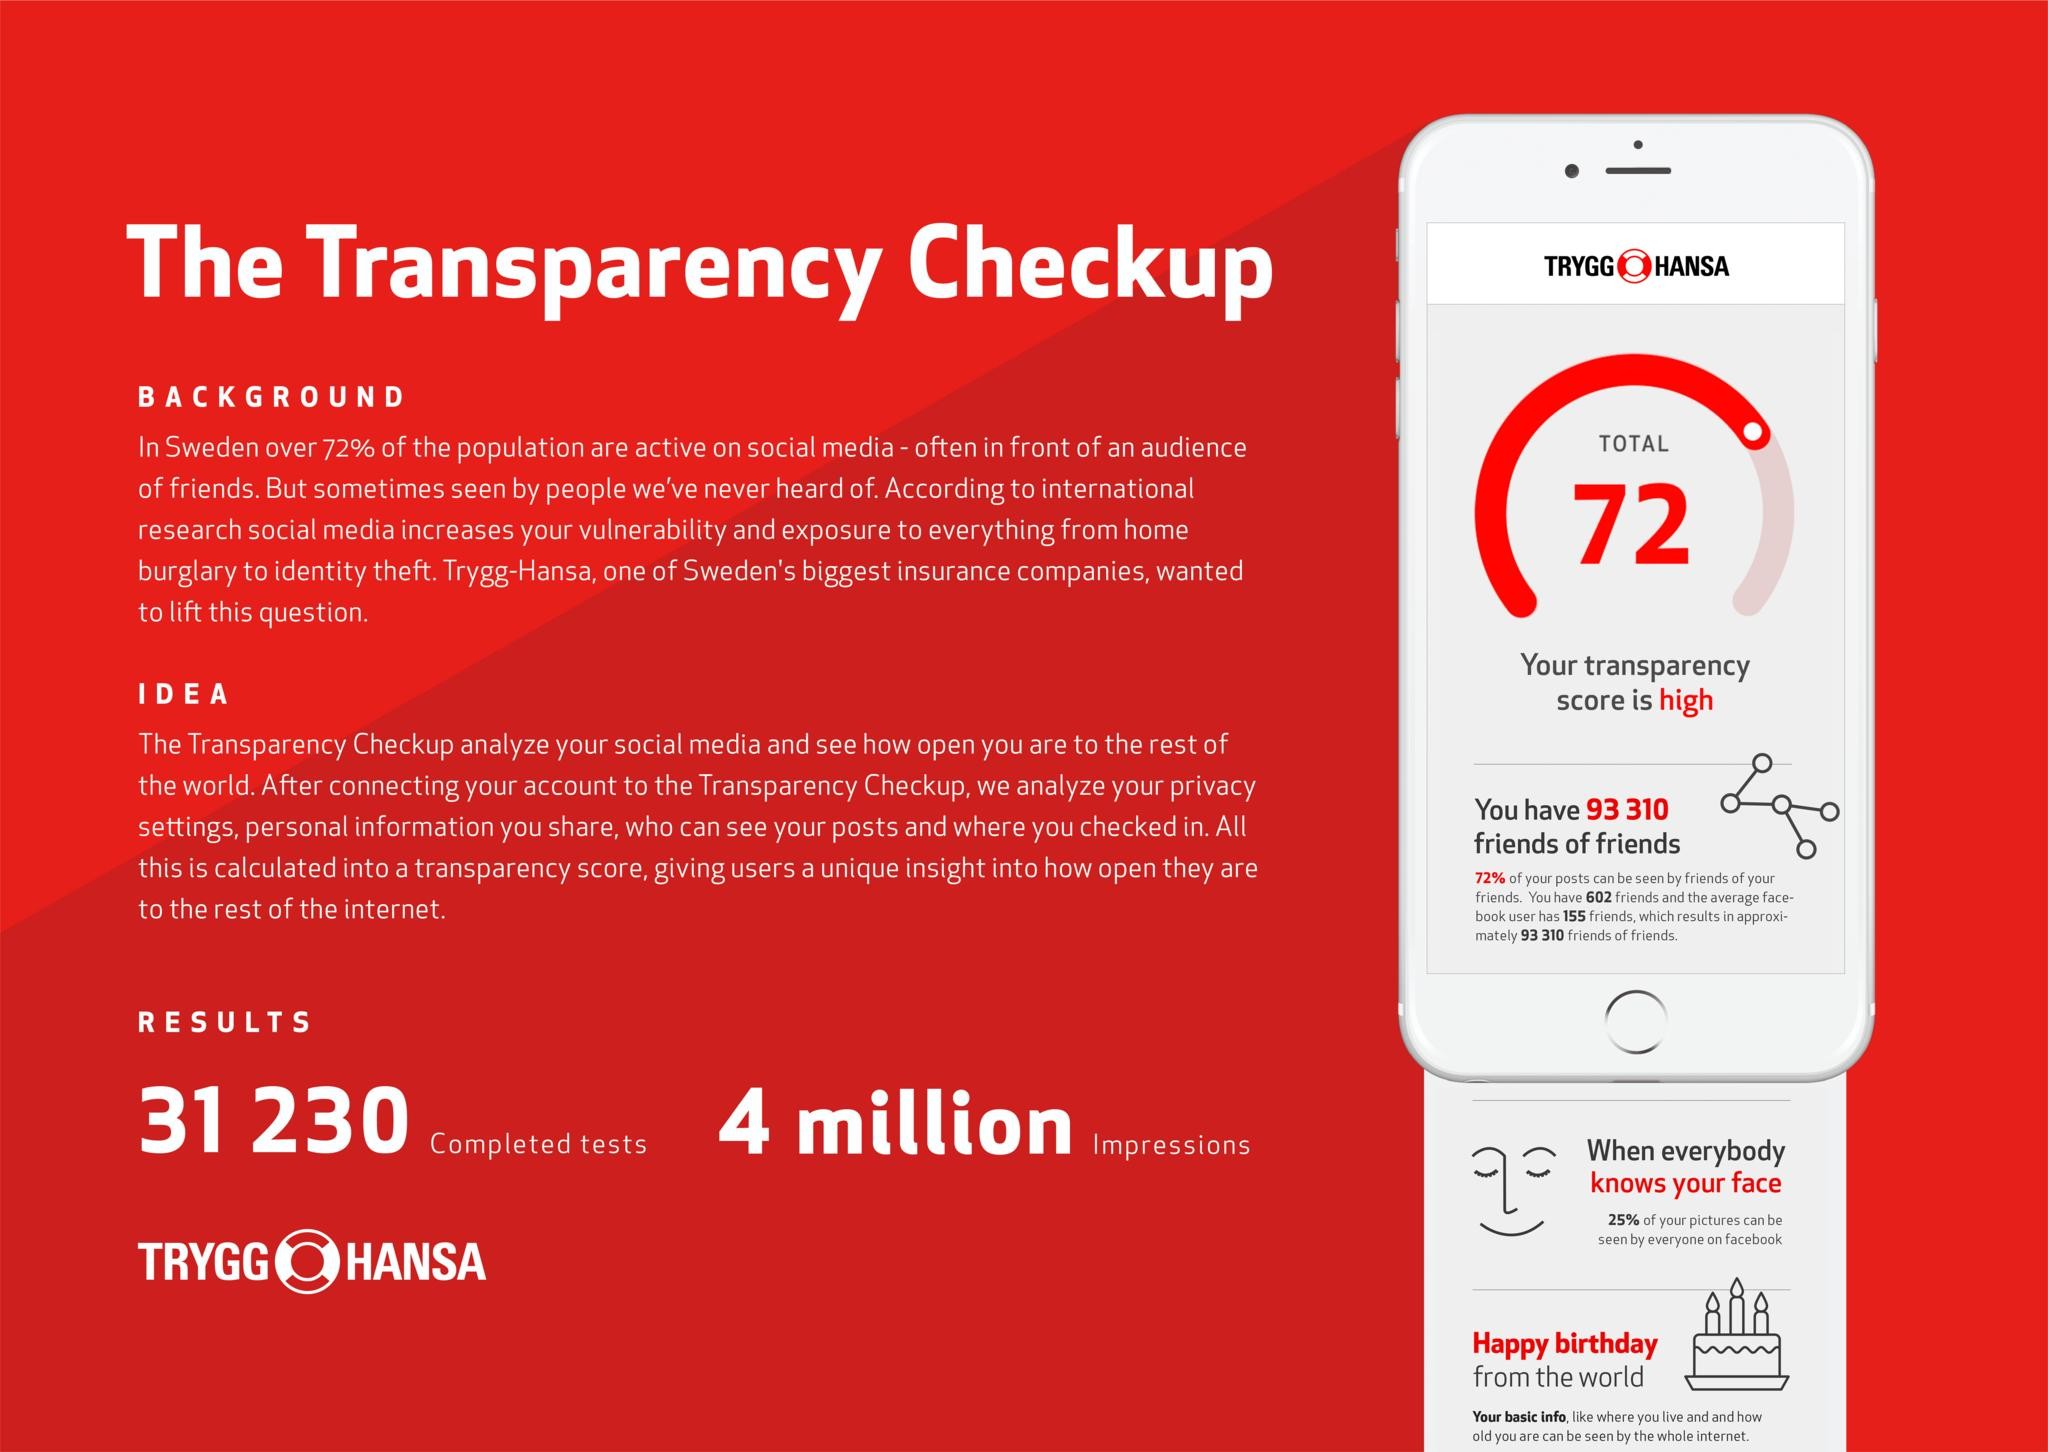 The Transparency Checkup